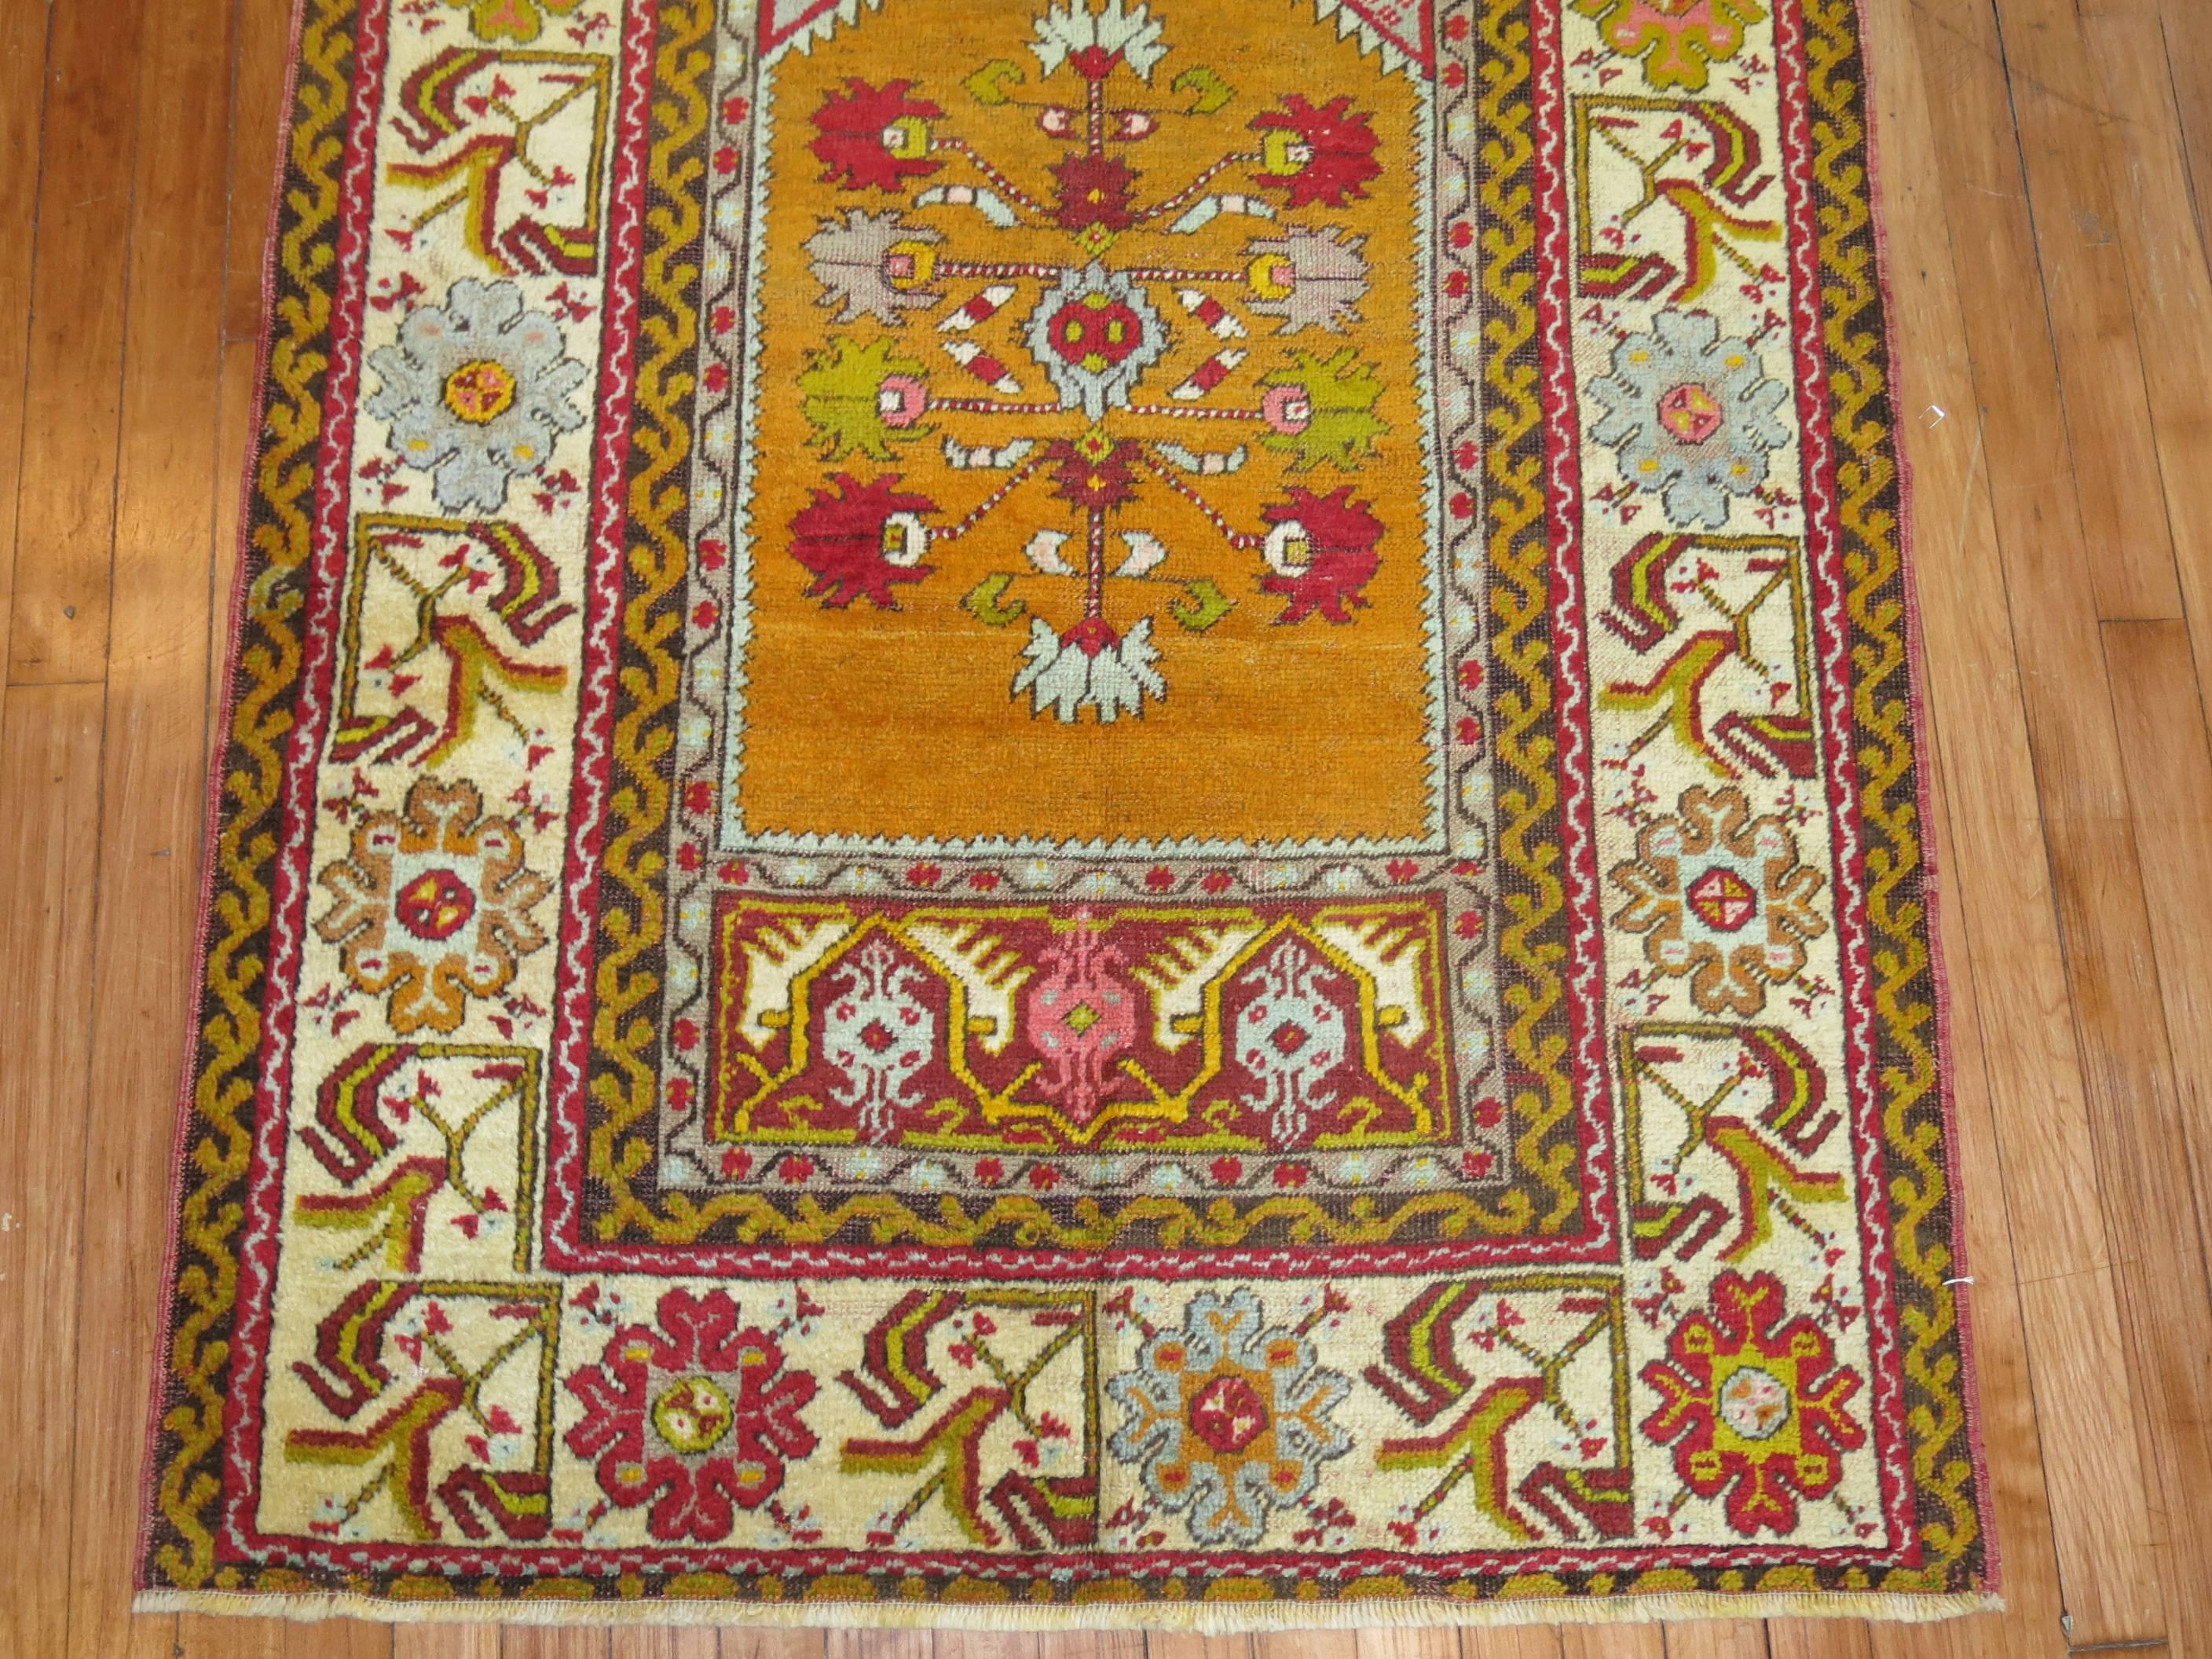 A one-of-a-kind vintage Turkish Oushak decorative throw rug.

3'5'' x 5'4''